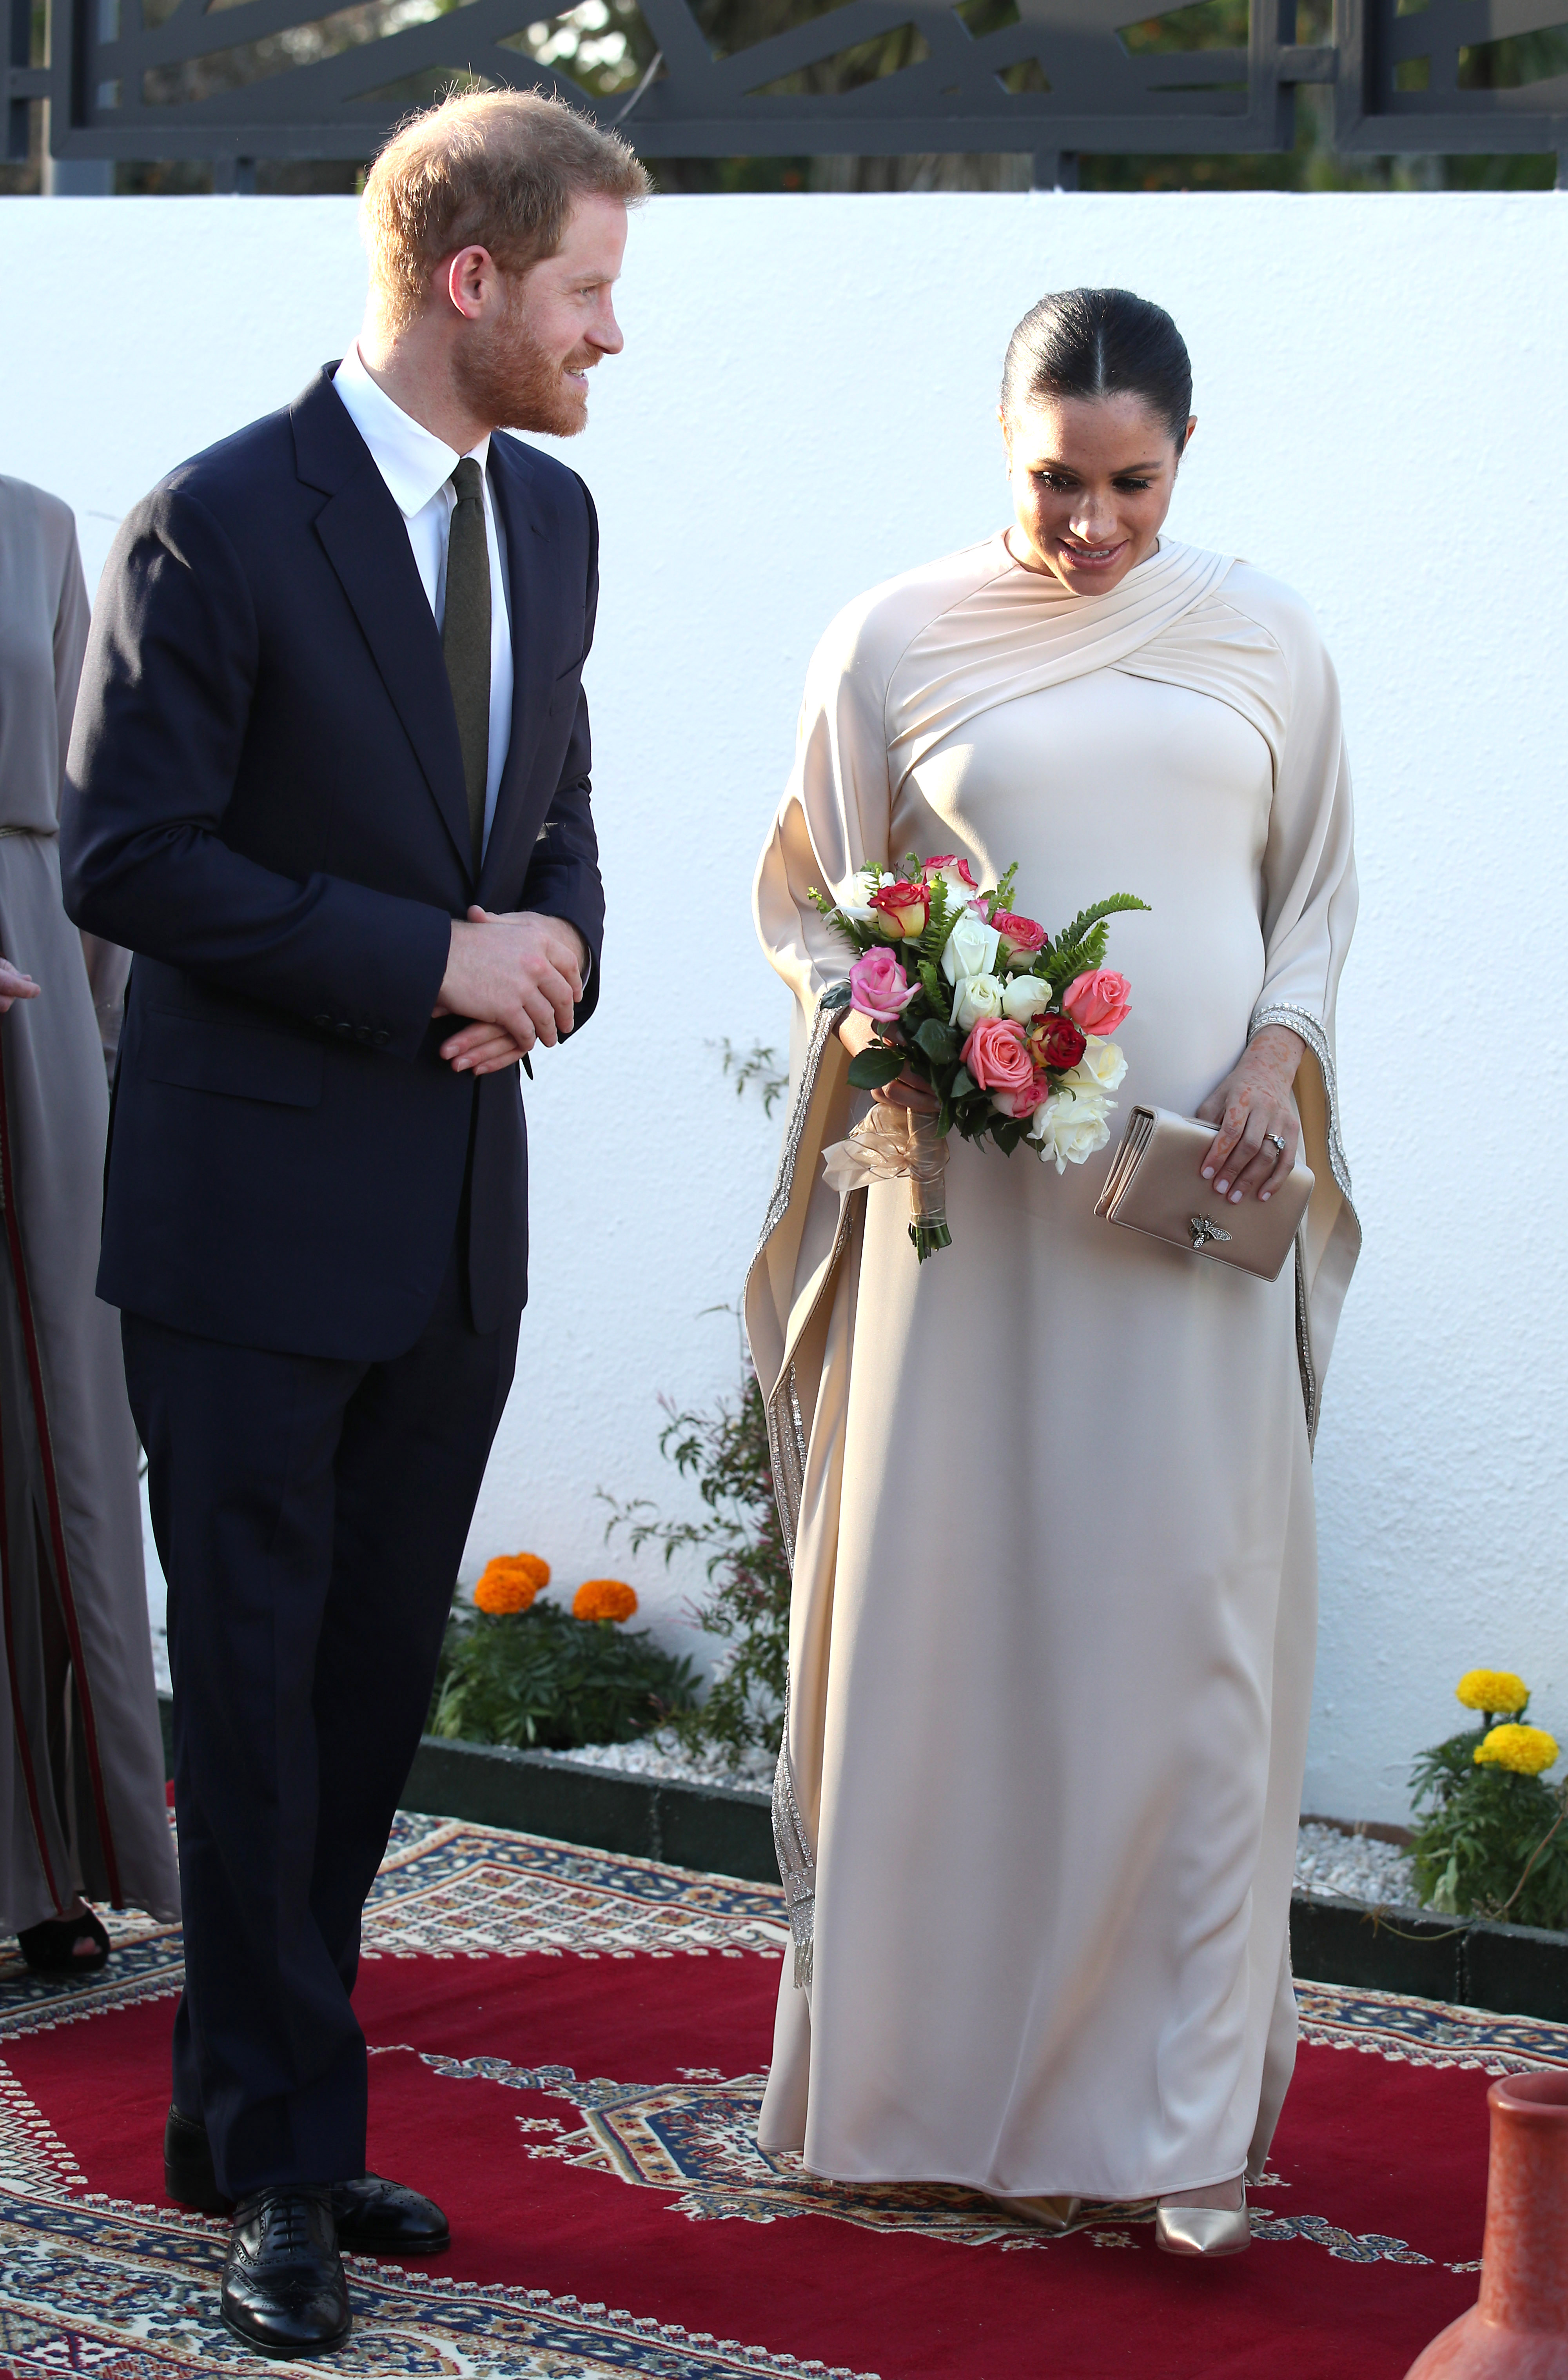 Prince Harry, Duke of Sussex and Meghan, Duchess of Sussex in Morocco in 2019 | Source: Getty Images